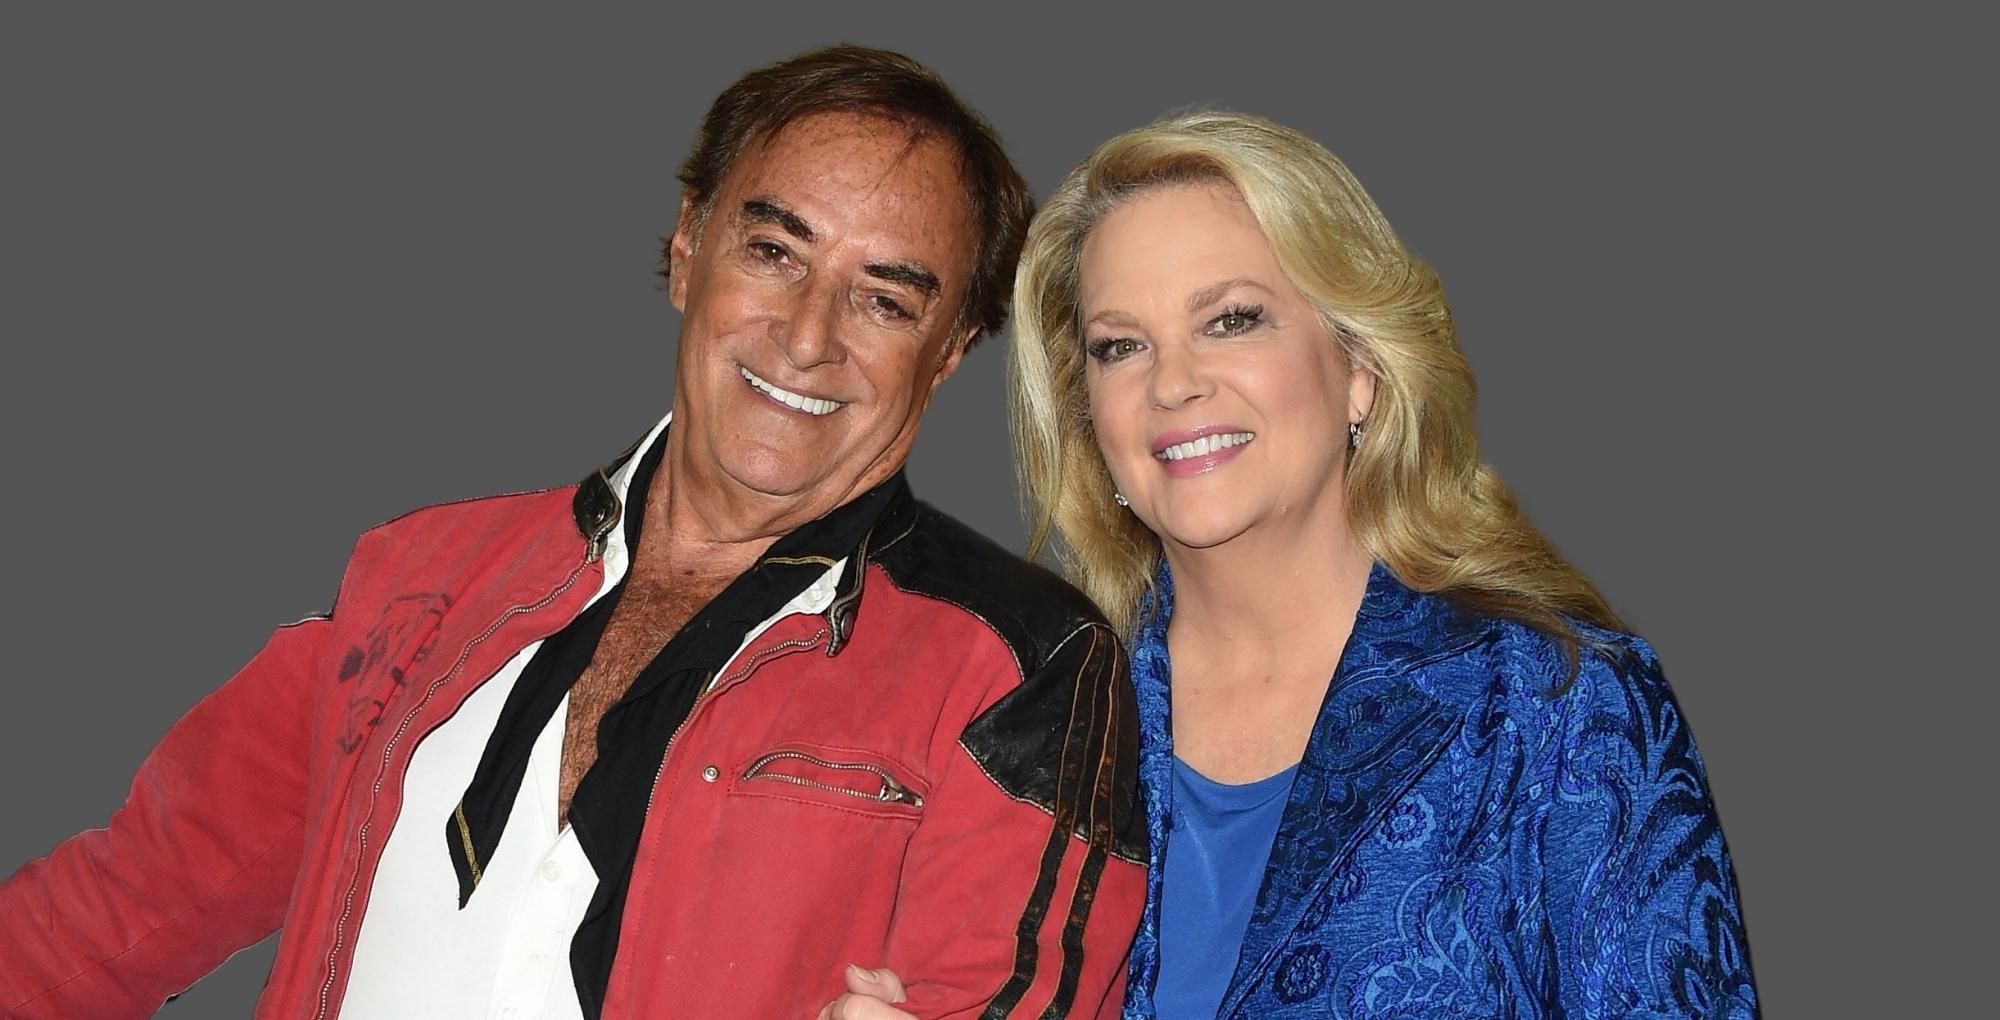 thaao penghlis in red and leann hunley in blue posing against a gray background days of our lives